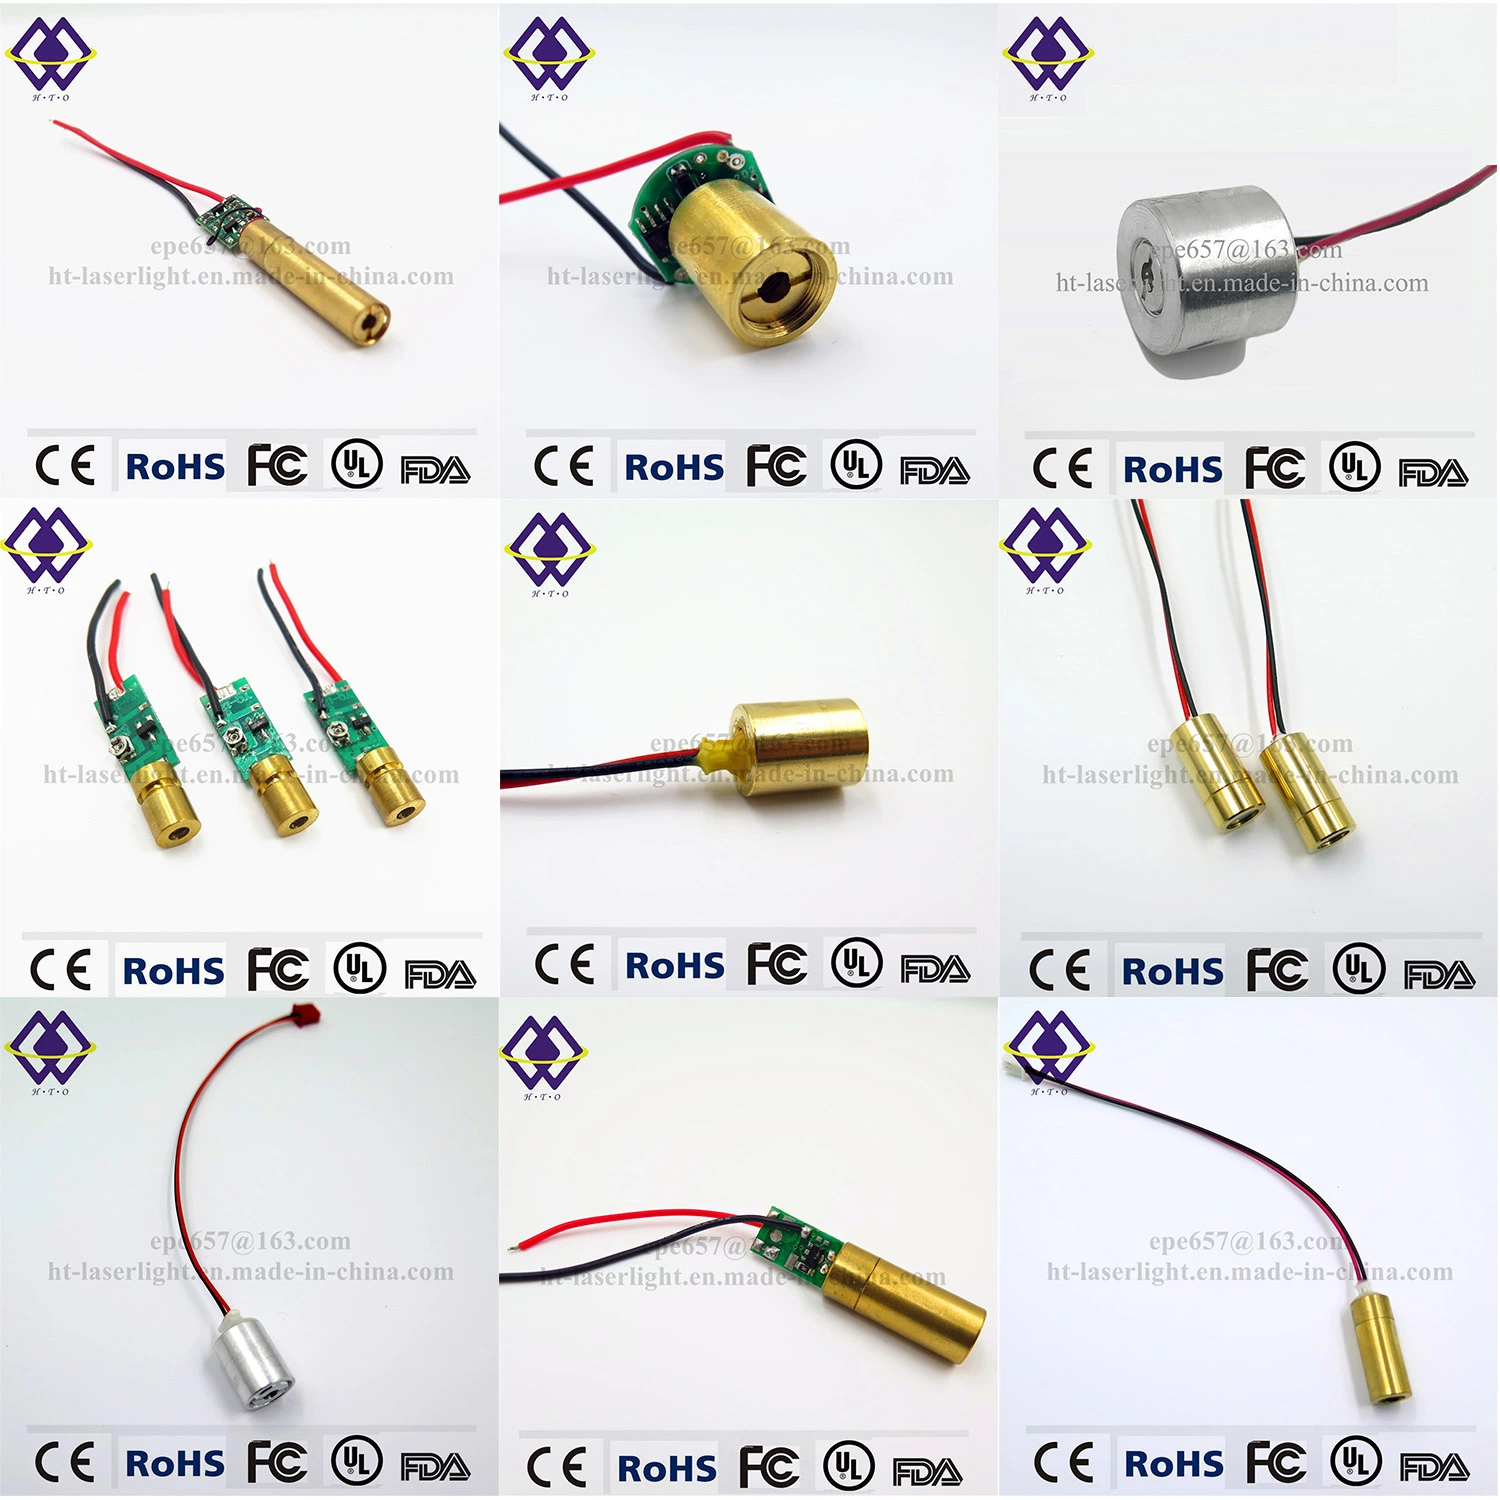 Factory Price Custom High Power 850nm 5MW~200MW IR Infrared Laser Module with Laser Diode